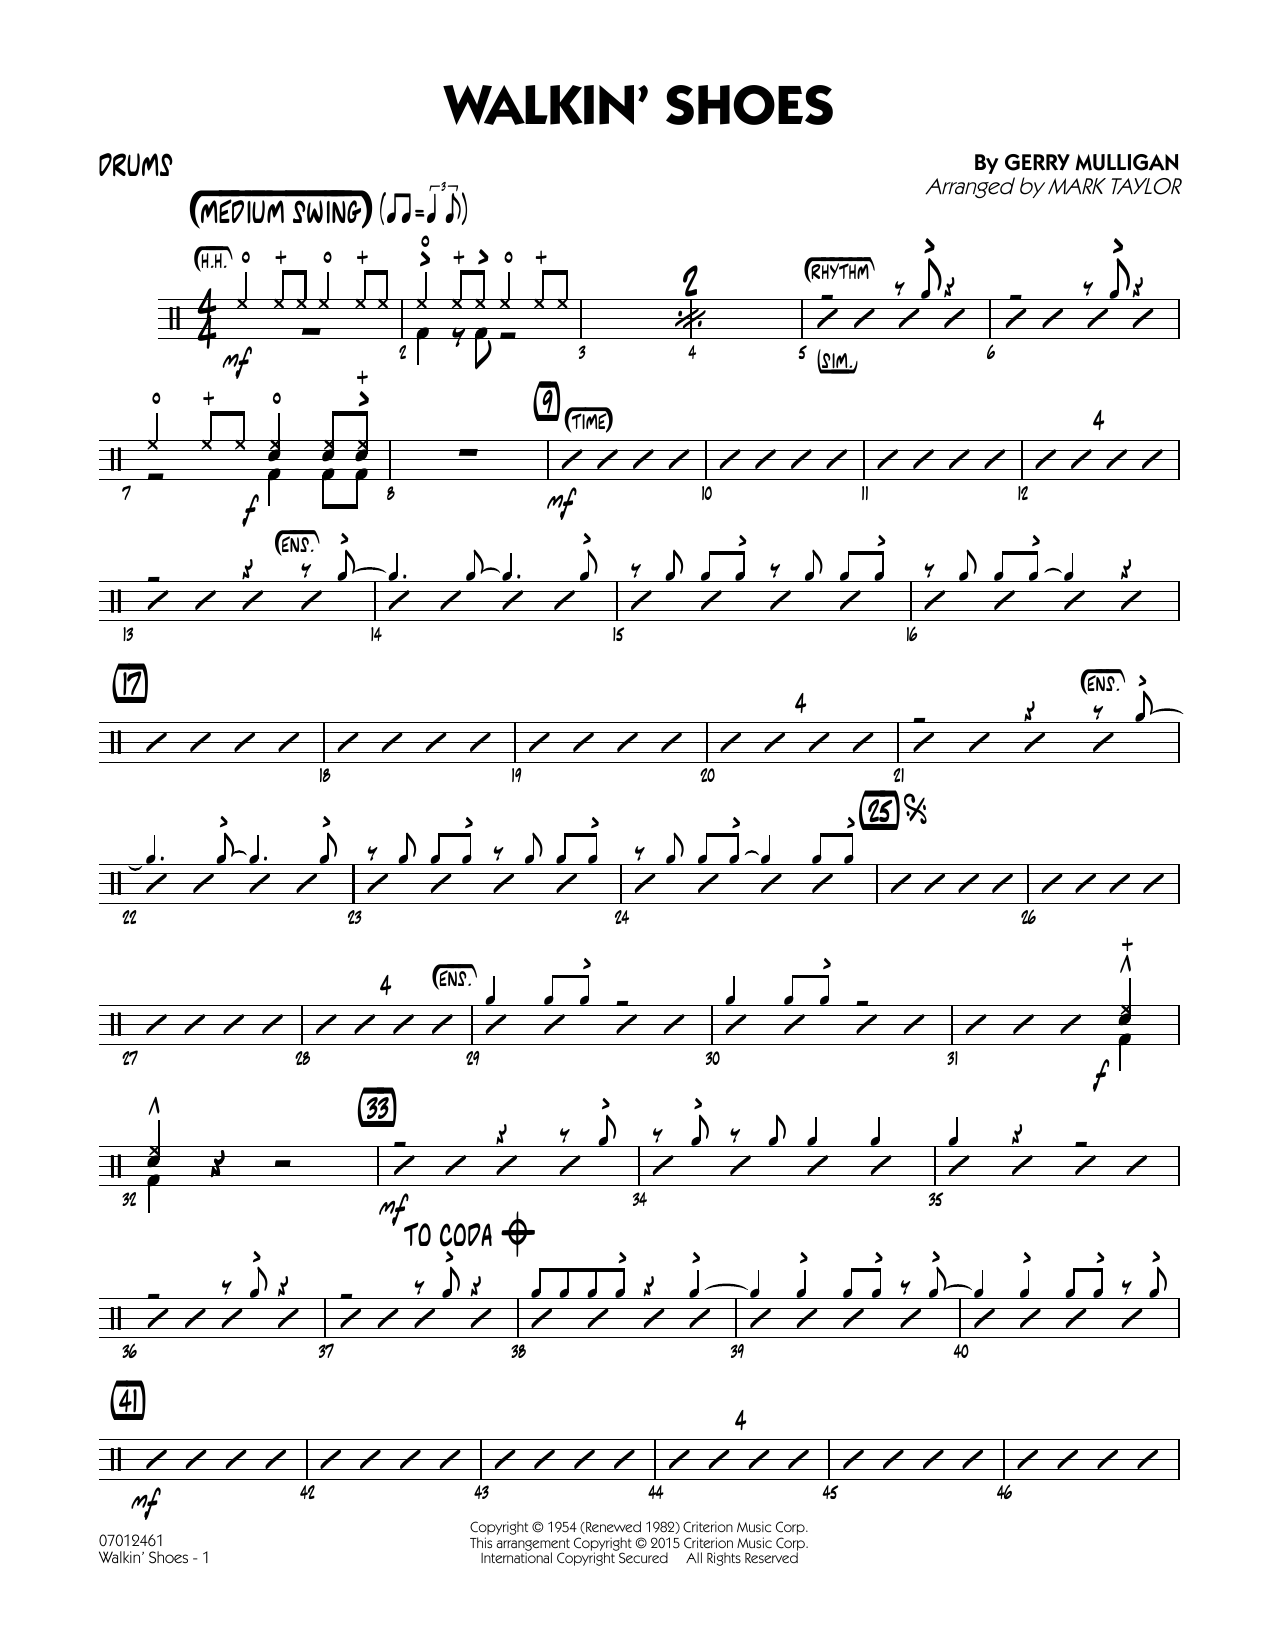 Mark Taylor Walkin' Shoes - Drums sheet music notes and chords. Download Printable PDF.